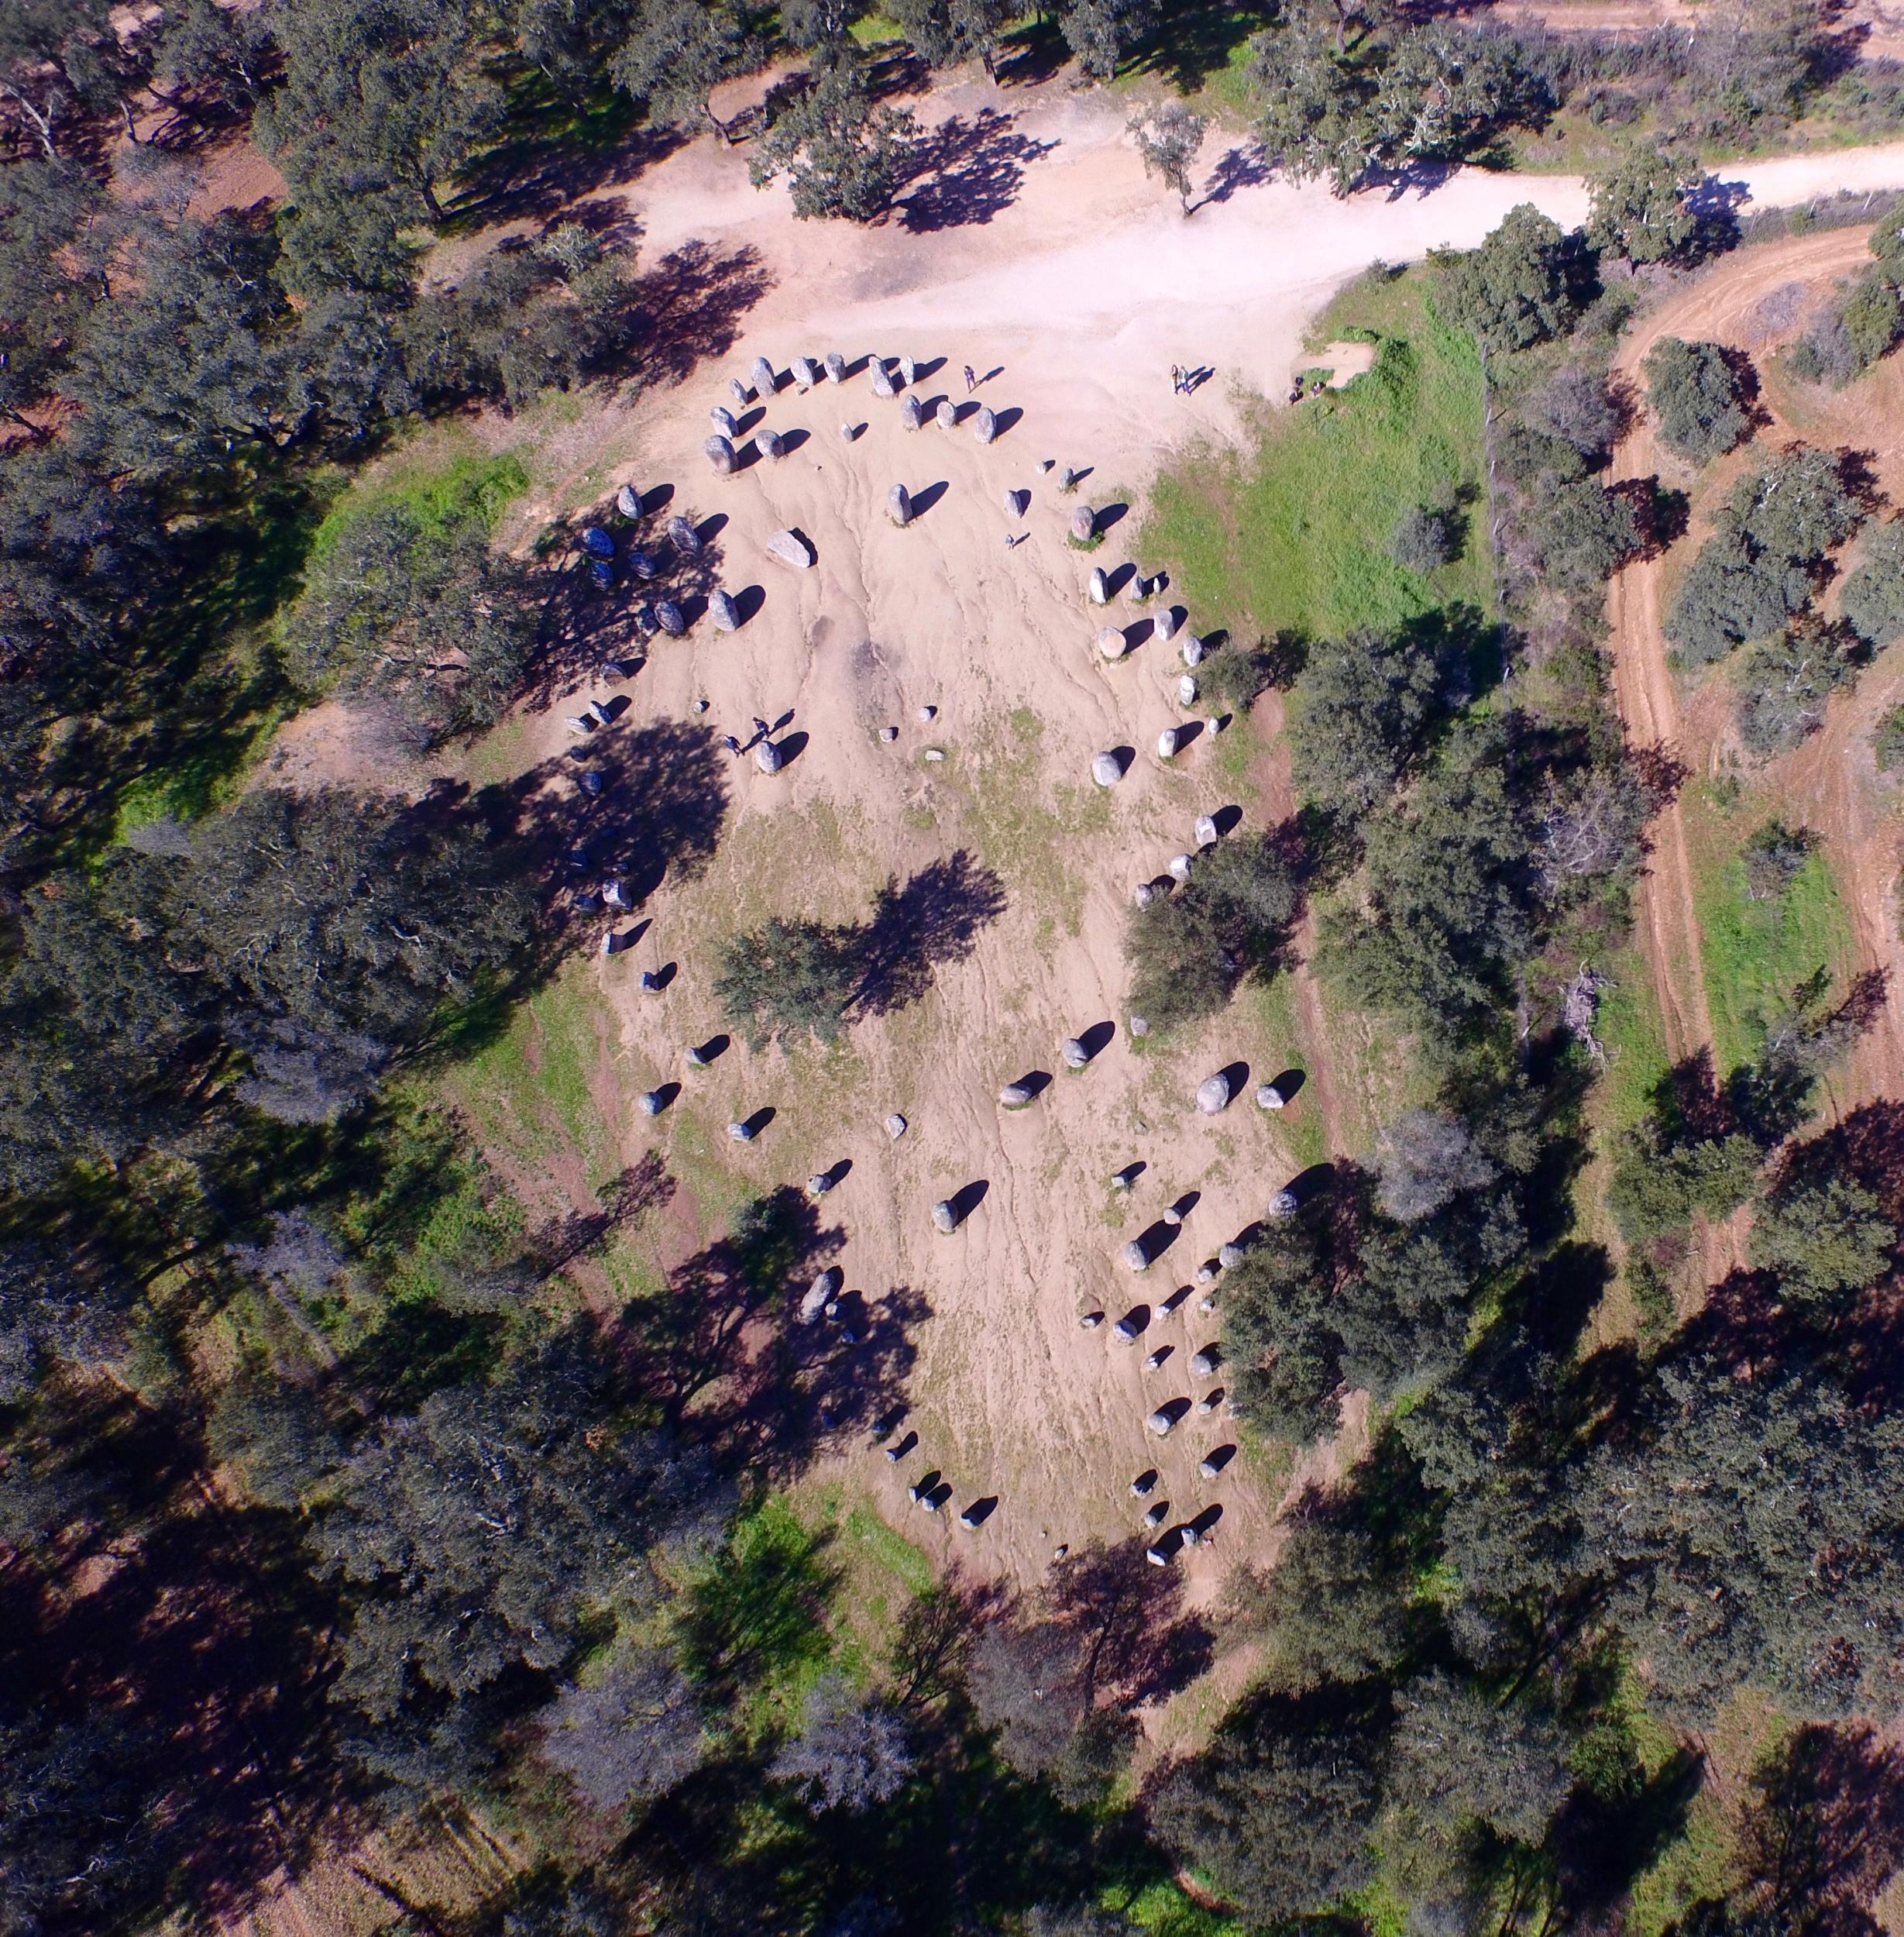 &#13;
The site was probably a circle adjoining an ellipse when it was built (Ebora Megalithic)&#13;